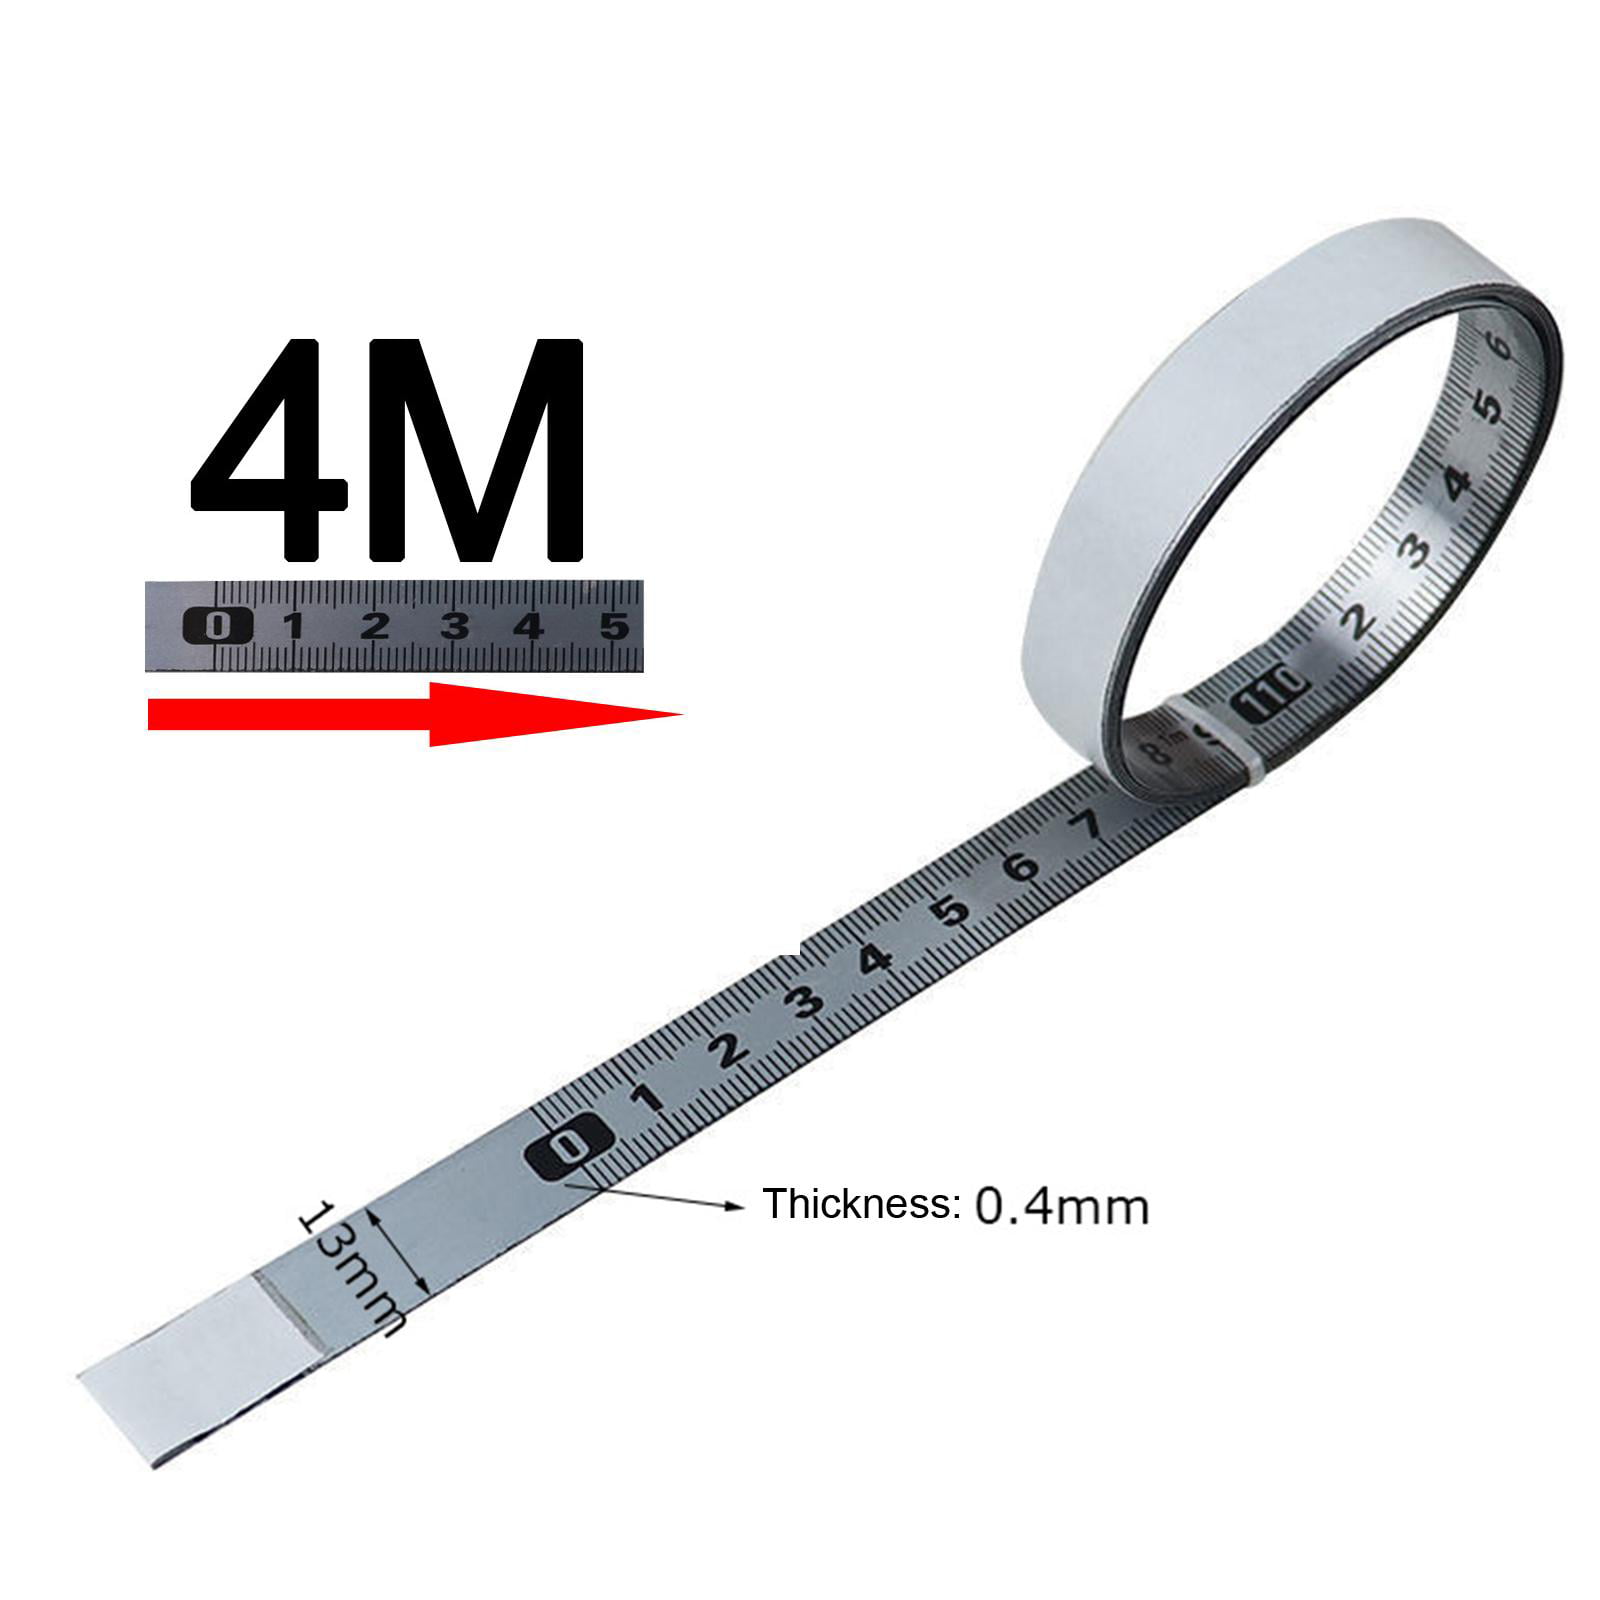 Win Tape Workbench Ruler Adhesive Backed Tape Measure 60inch 152cm (Right to Left - Inch/cm)